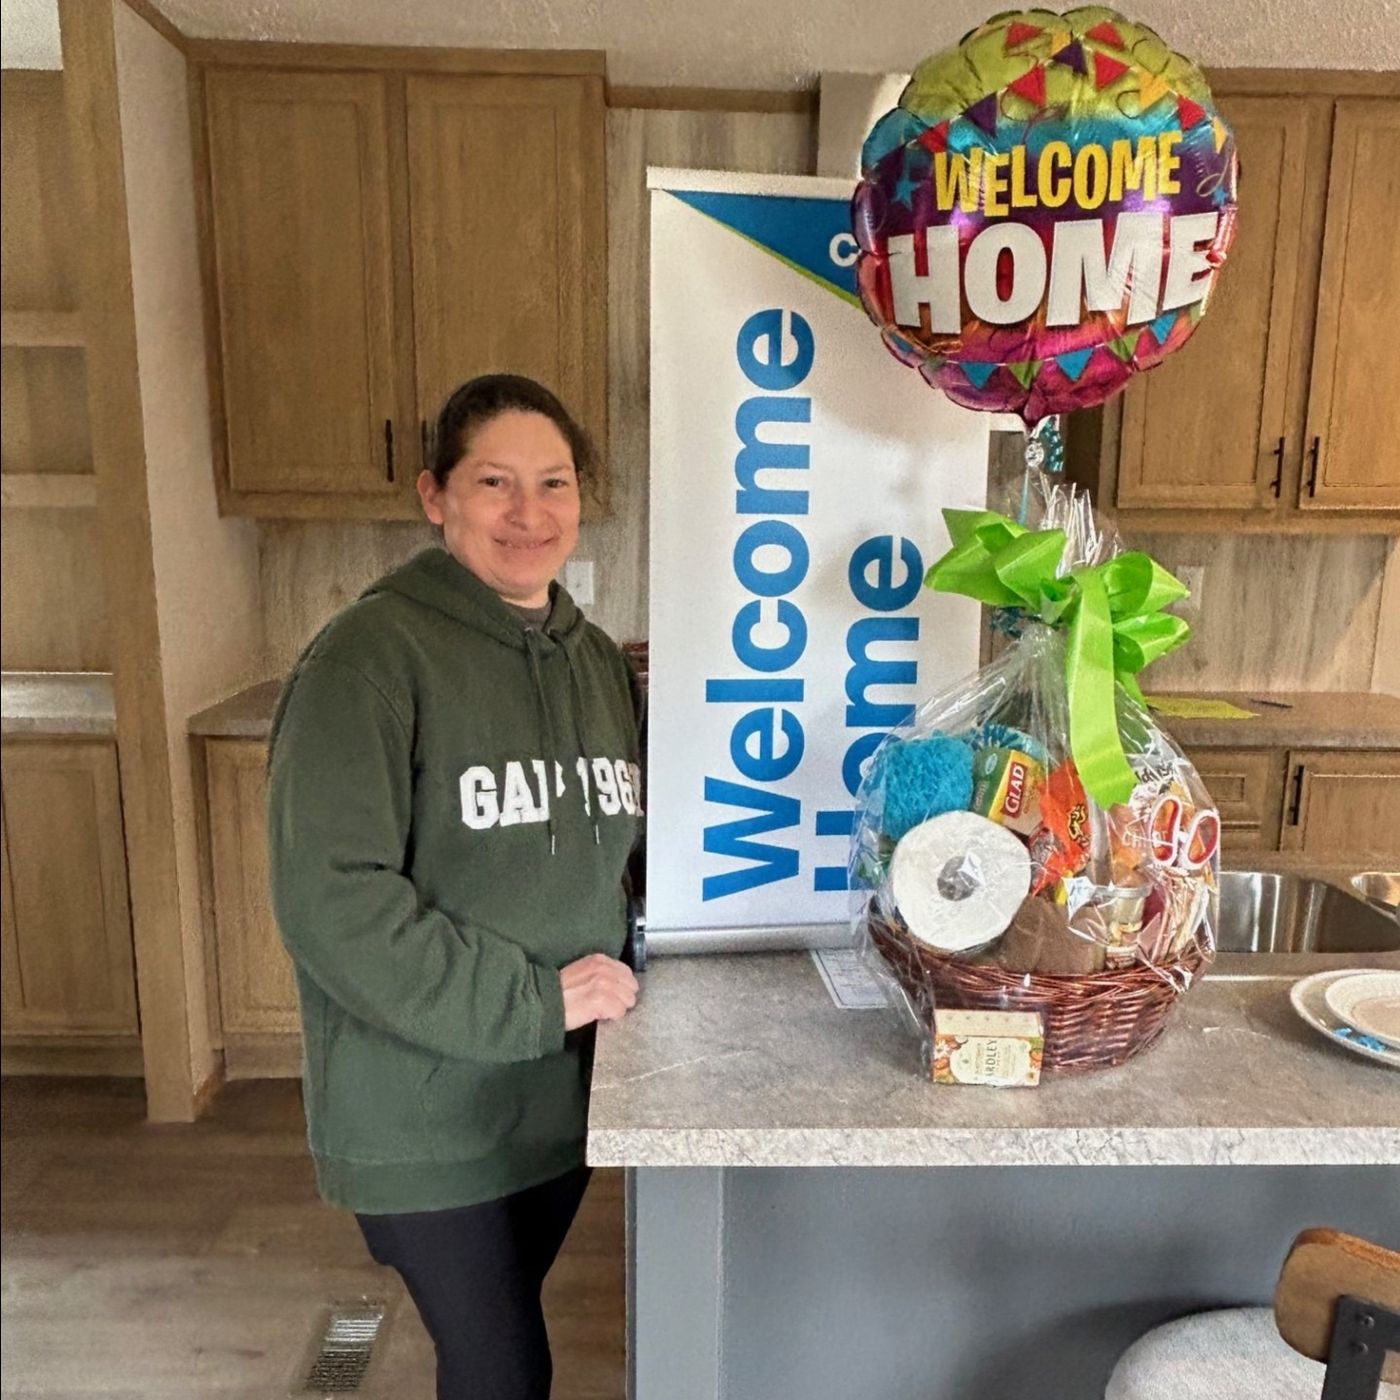 ROSA M. welcome home image